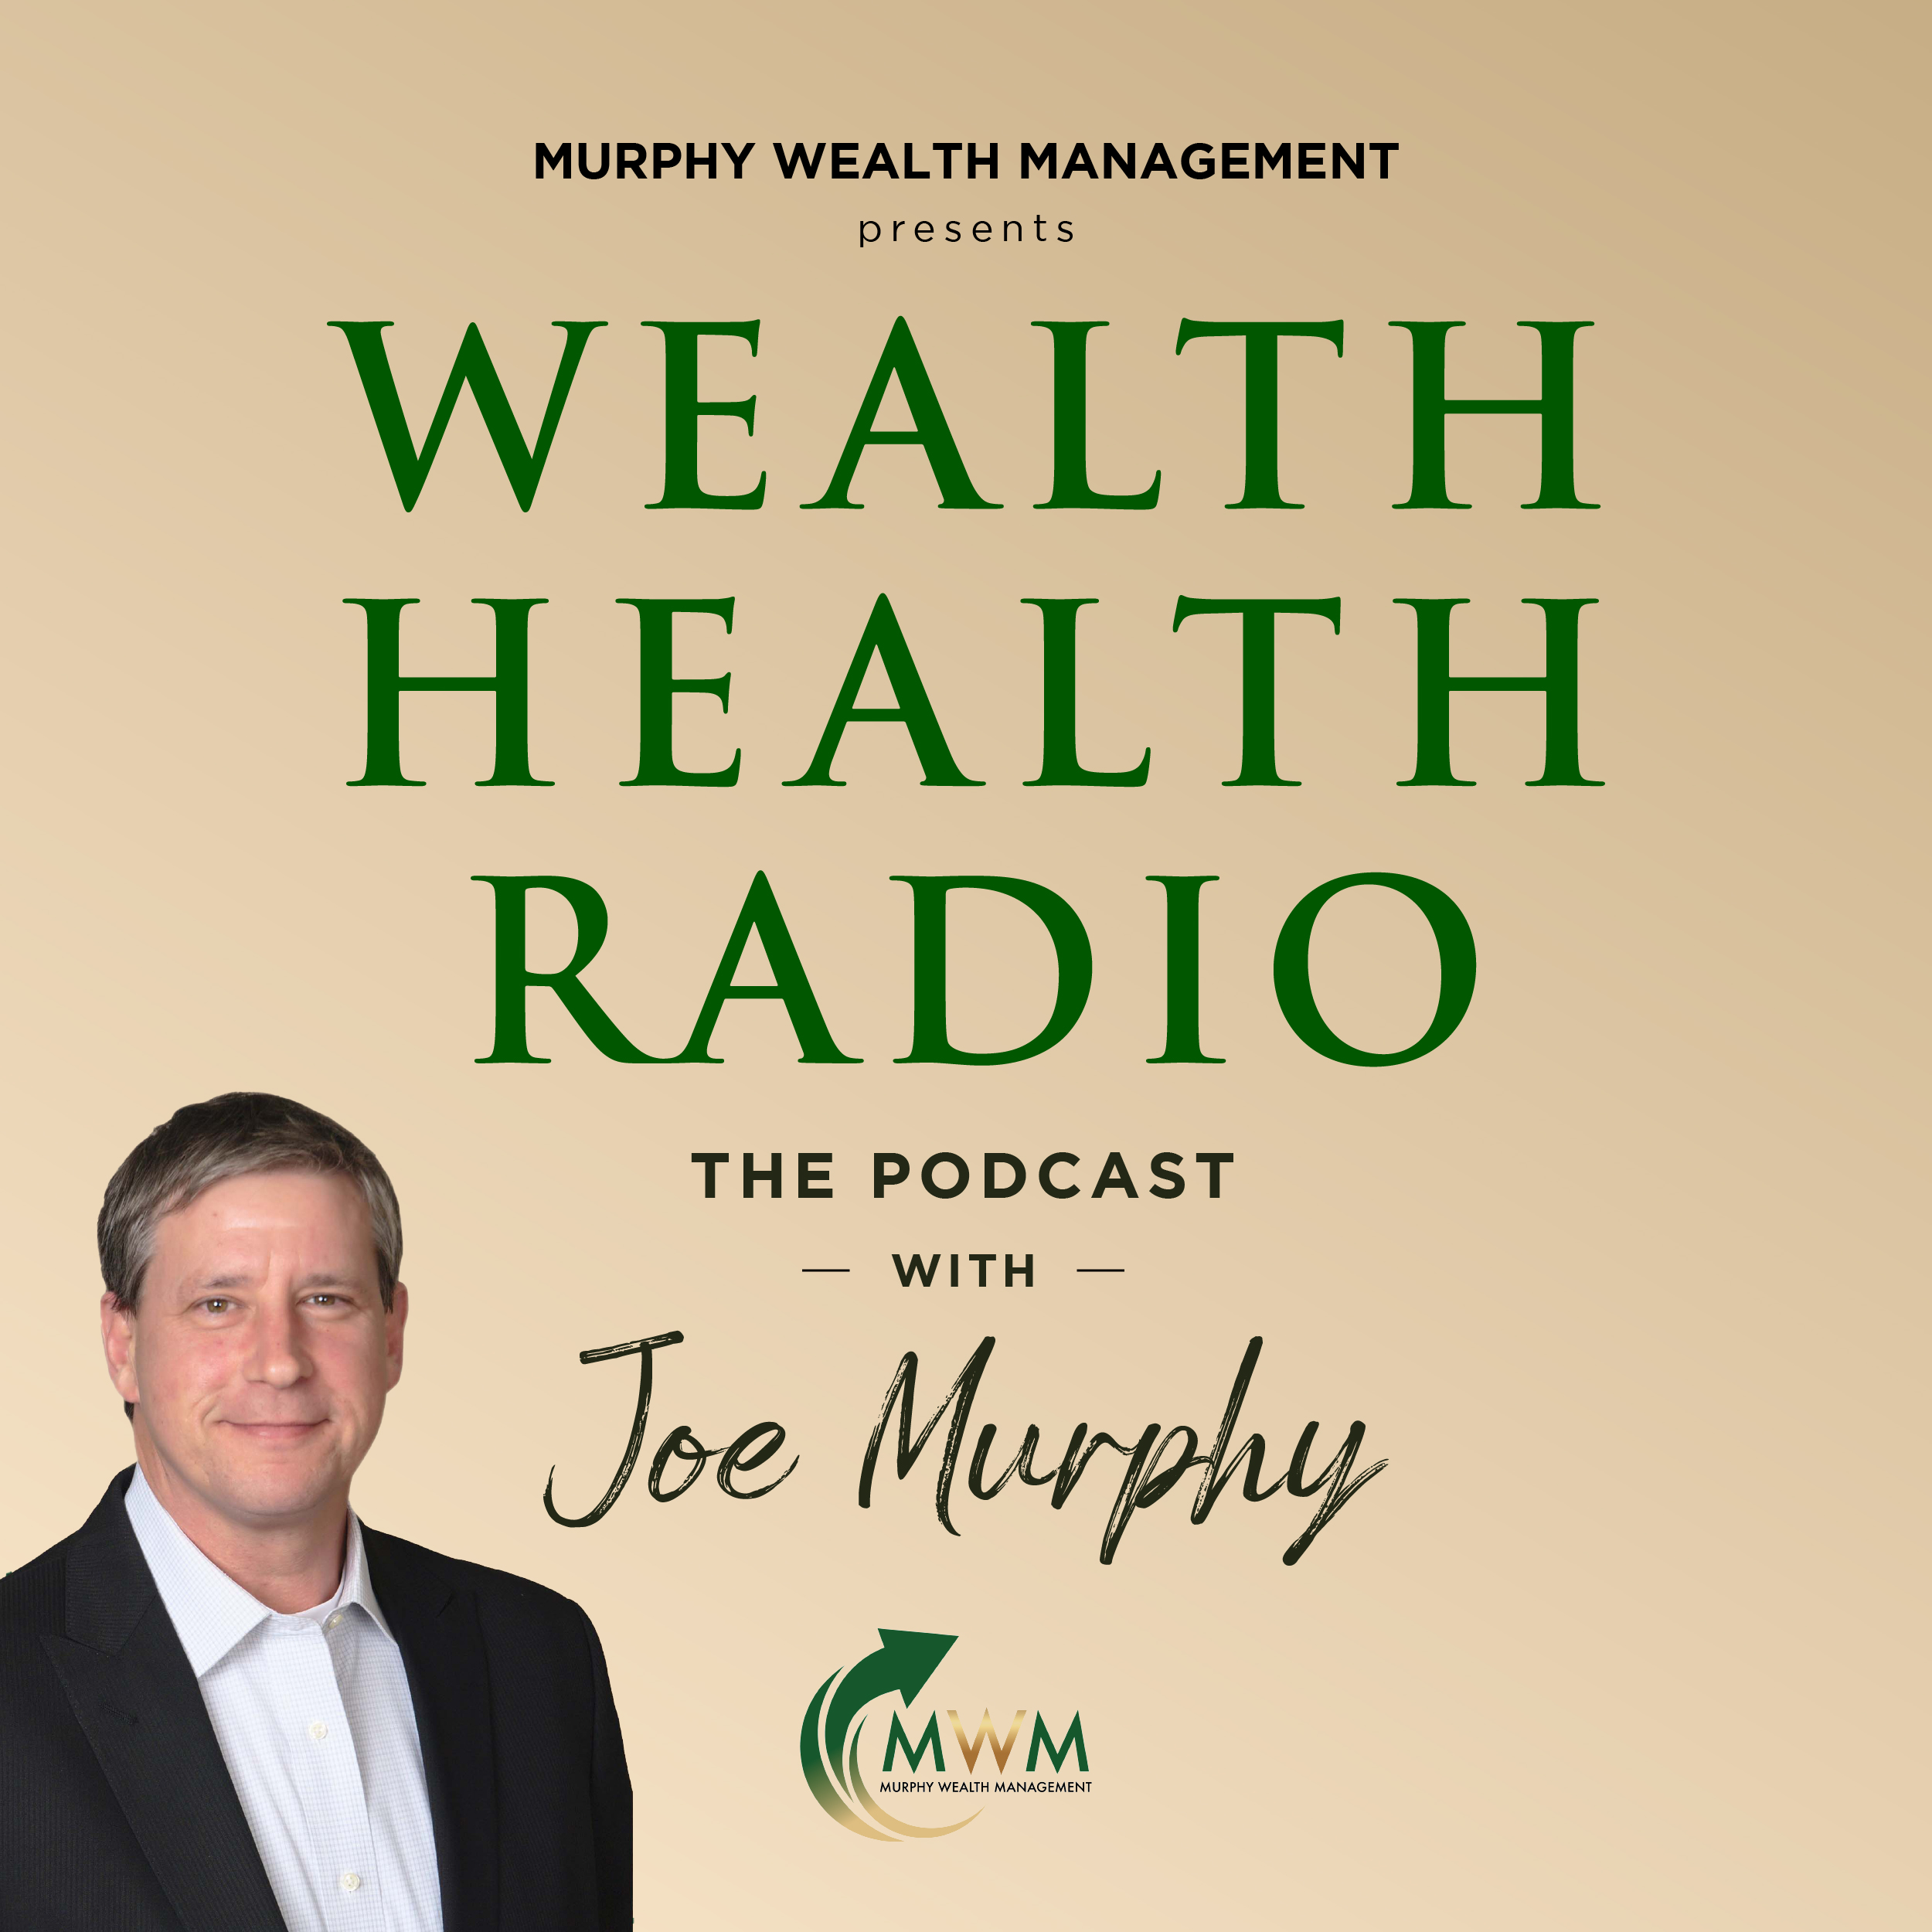 The conversation covers the topic of retirement planning, financial regrets, and the role of annuities in retirement income planning.